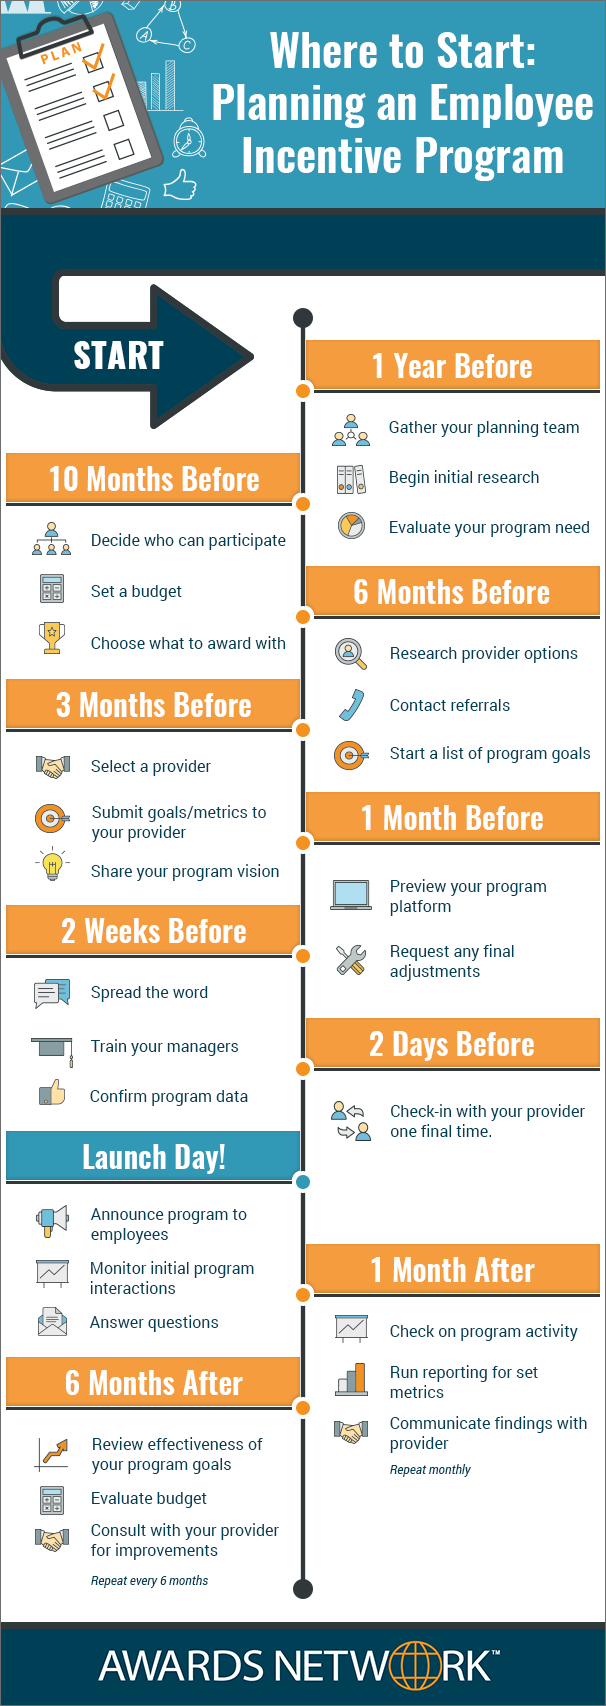 where-to-start-planning-an-employee-incentive-program-infographic